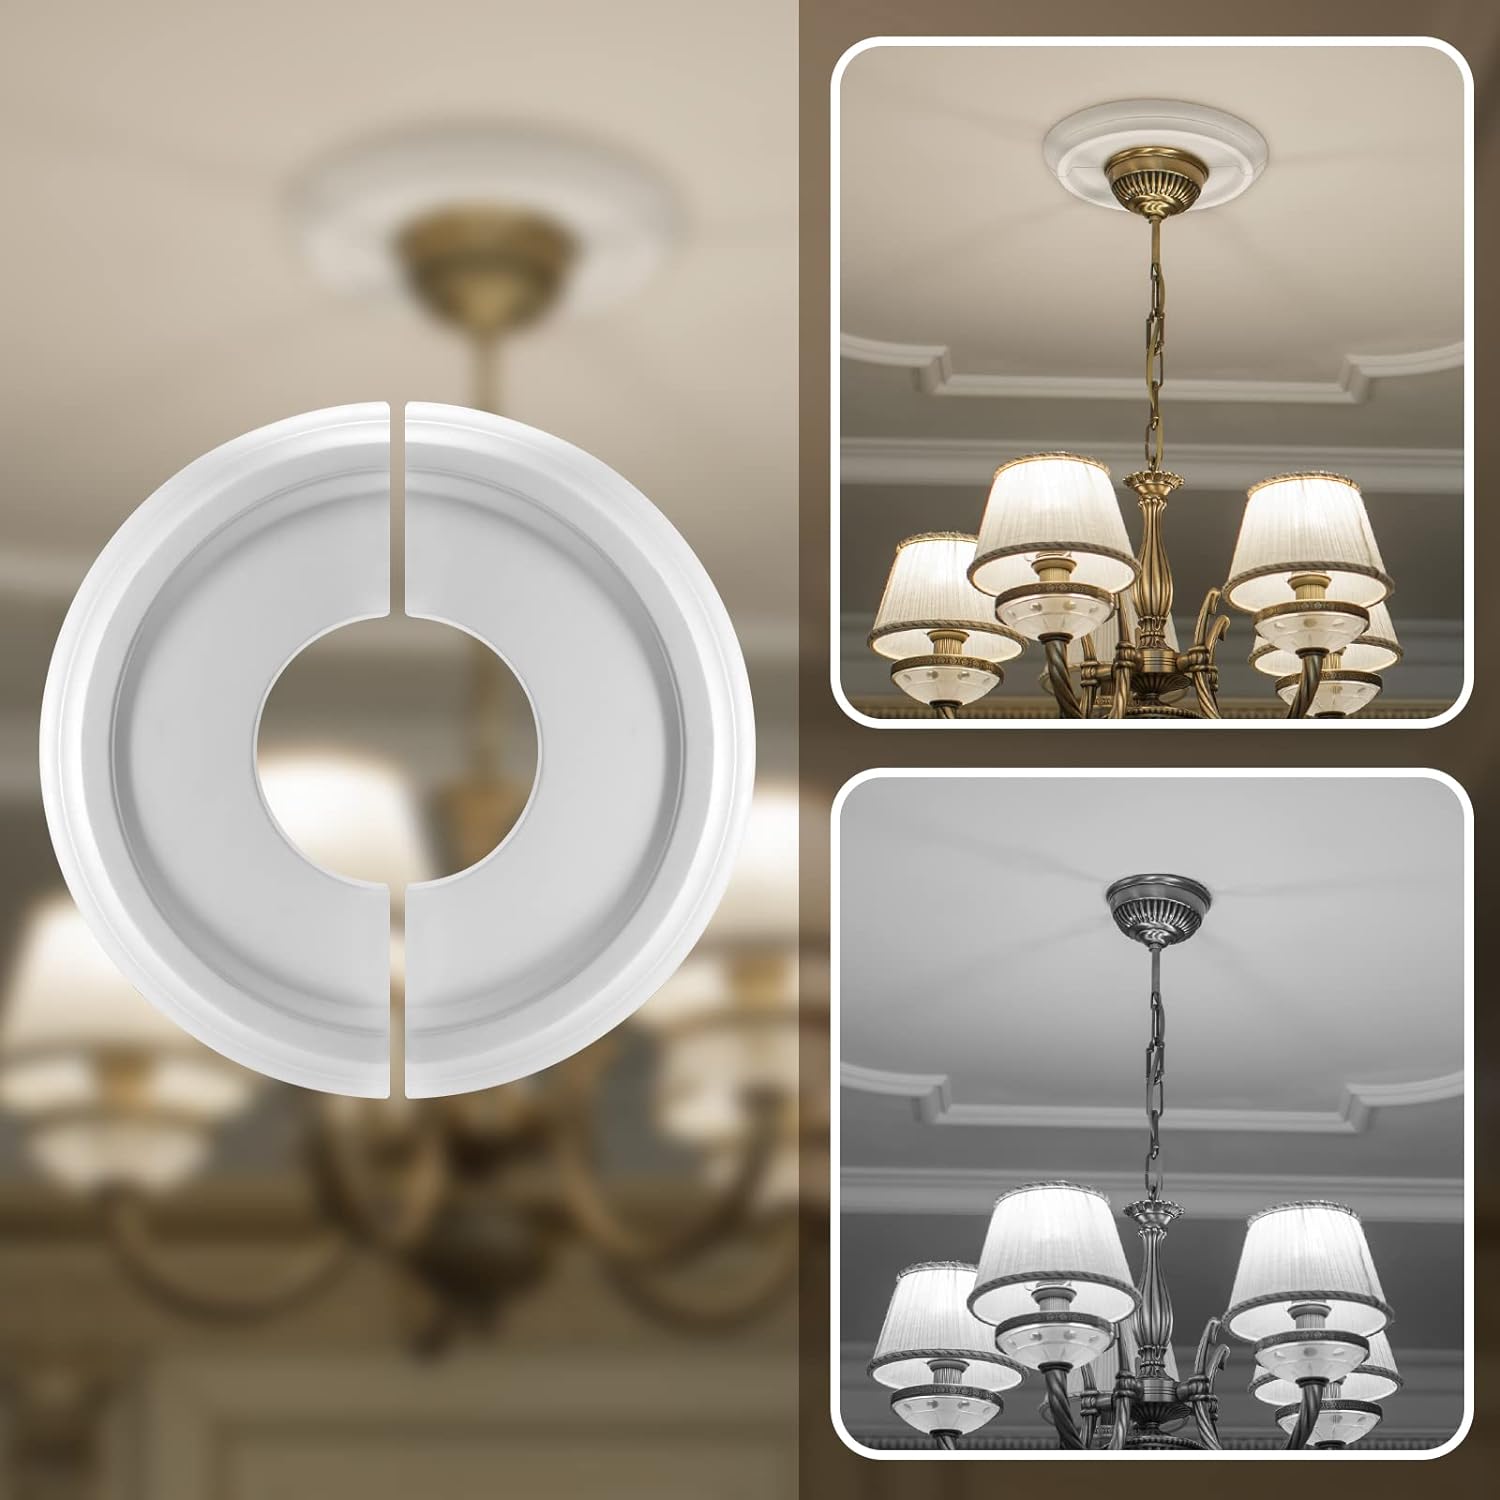 Generic Canomo Split Ceiling Medallion for Light Fixtures and Ceiling Fans, 10"OD x 4"ID, Matte White